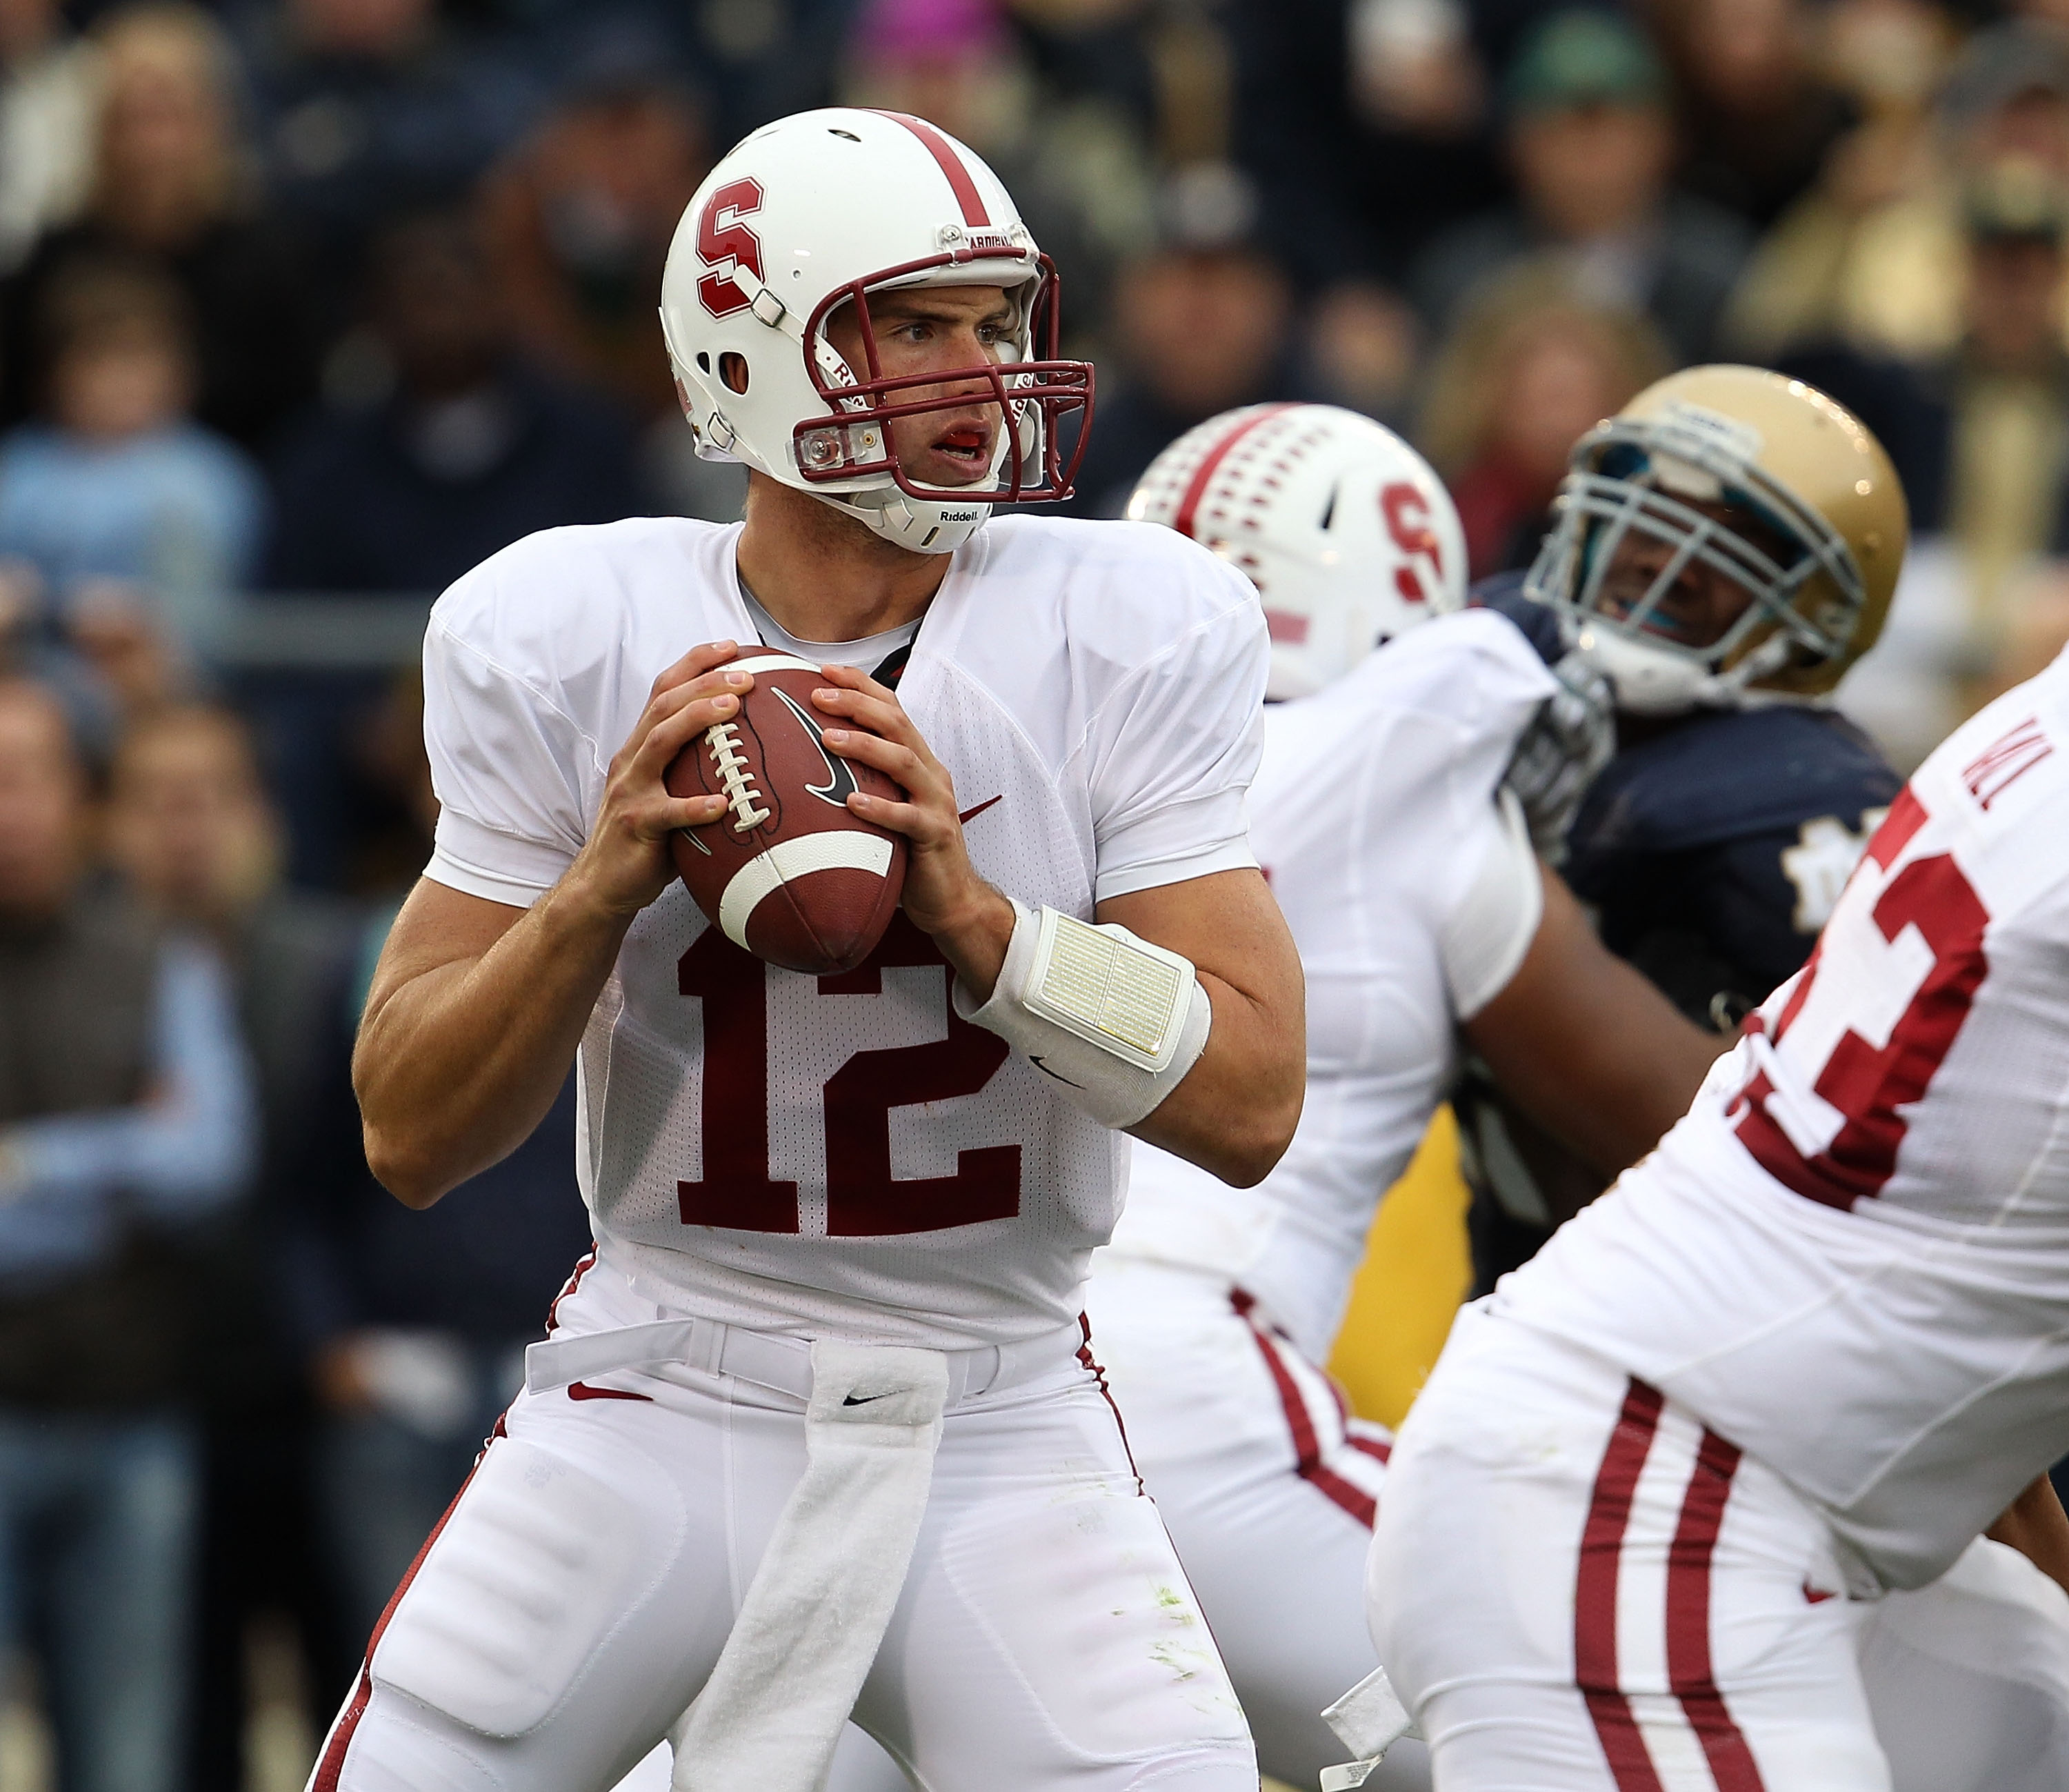 SOUTH BEND, IN - SEPTEMBER 25: Andrew Luck #12 of the Stanford Cardinal looks for a receiver against the Notre Dame Fighting Irish at Notre Dame Stadium on September 25, 2010 in South Bend, Indiana. Stanford defeated Notre Dame 37-14. (Photo by Jonathan D